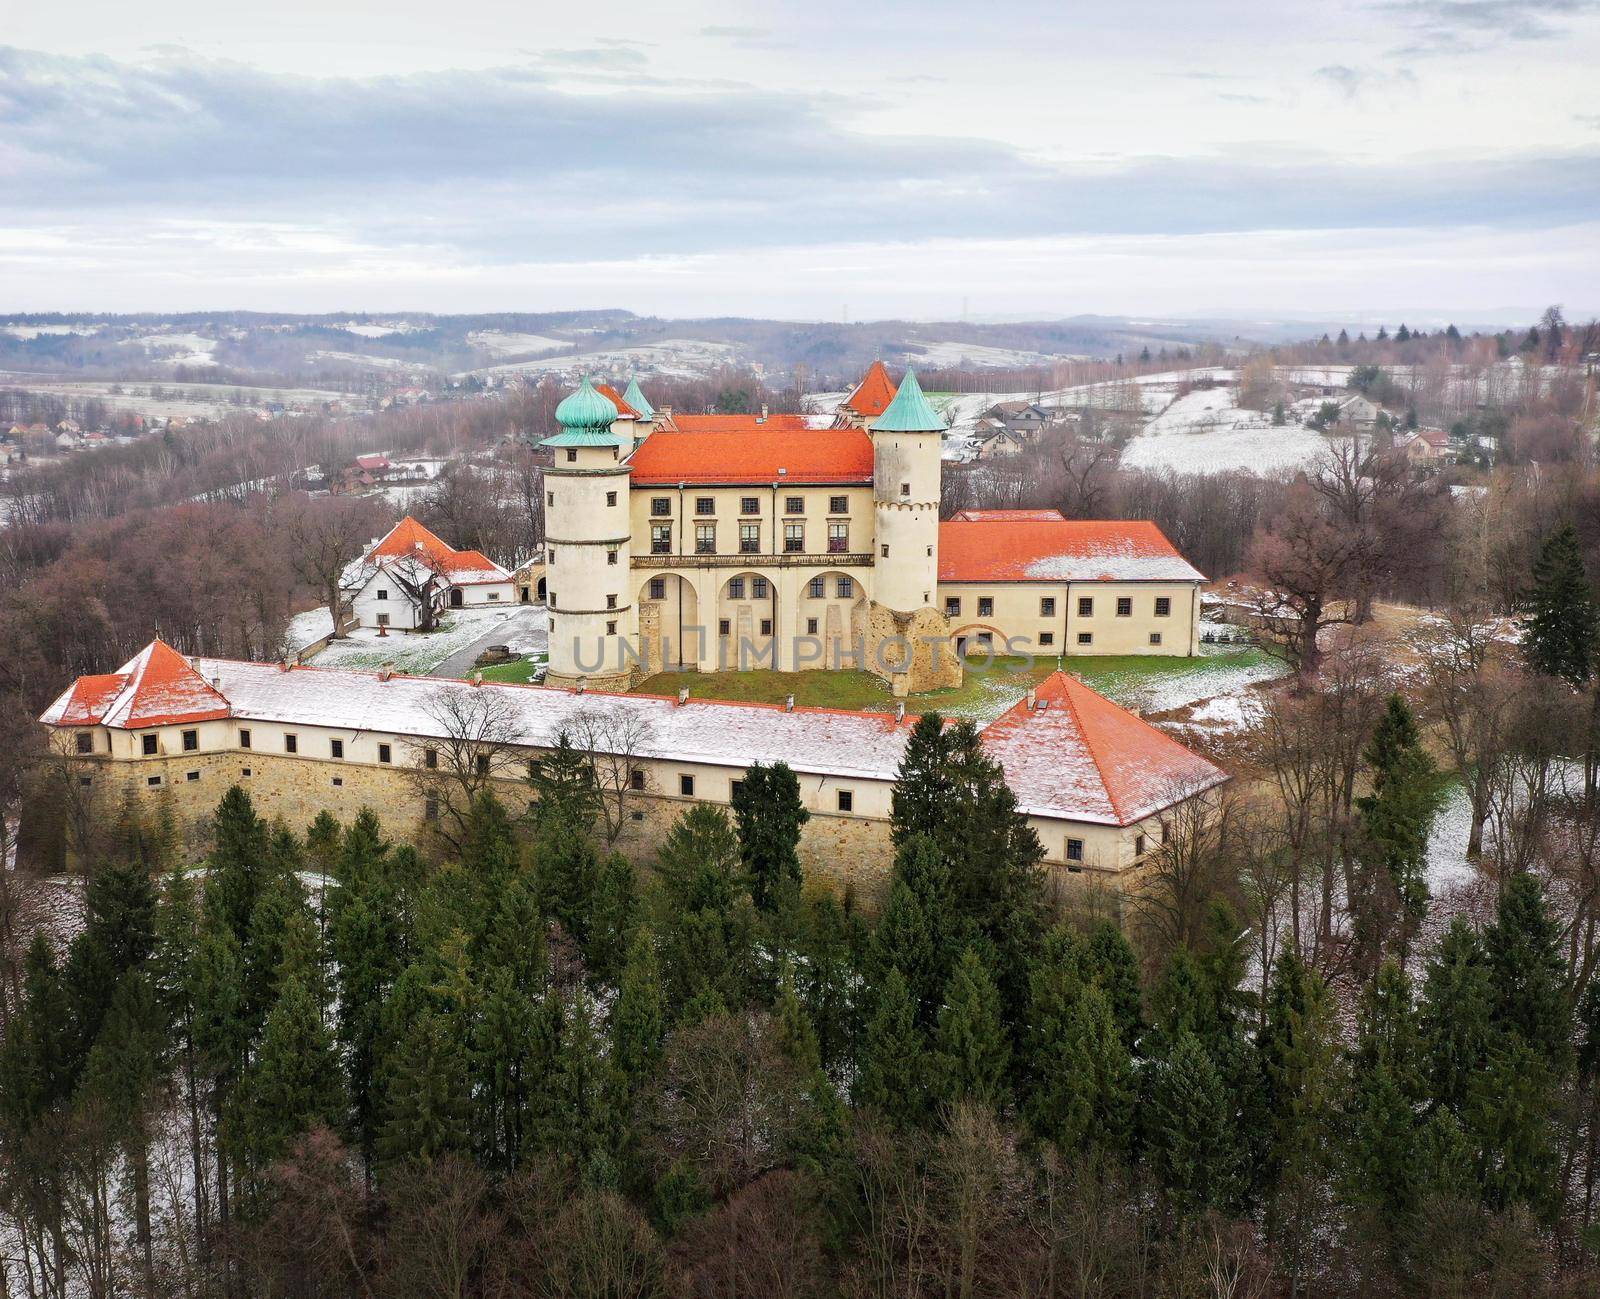 View from the height of the castle in Nowy Wisnicz in winter, Po by vlad_star